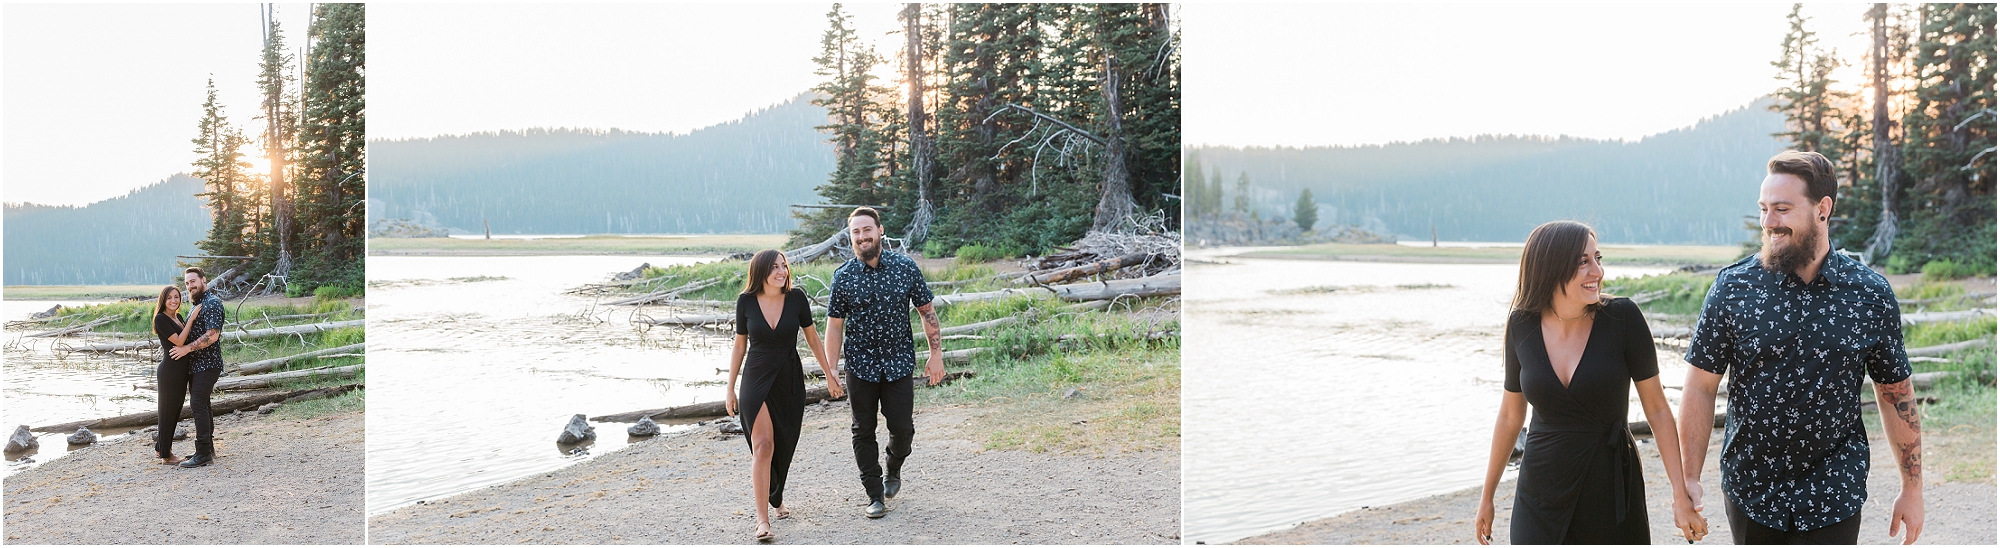 A gorgeous brunette wearing a black dress and a handsome tattooed man walk hand in hand during their engagement session at Sparks Lake near Bend, OR. | Erica Swantek Photography